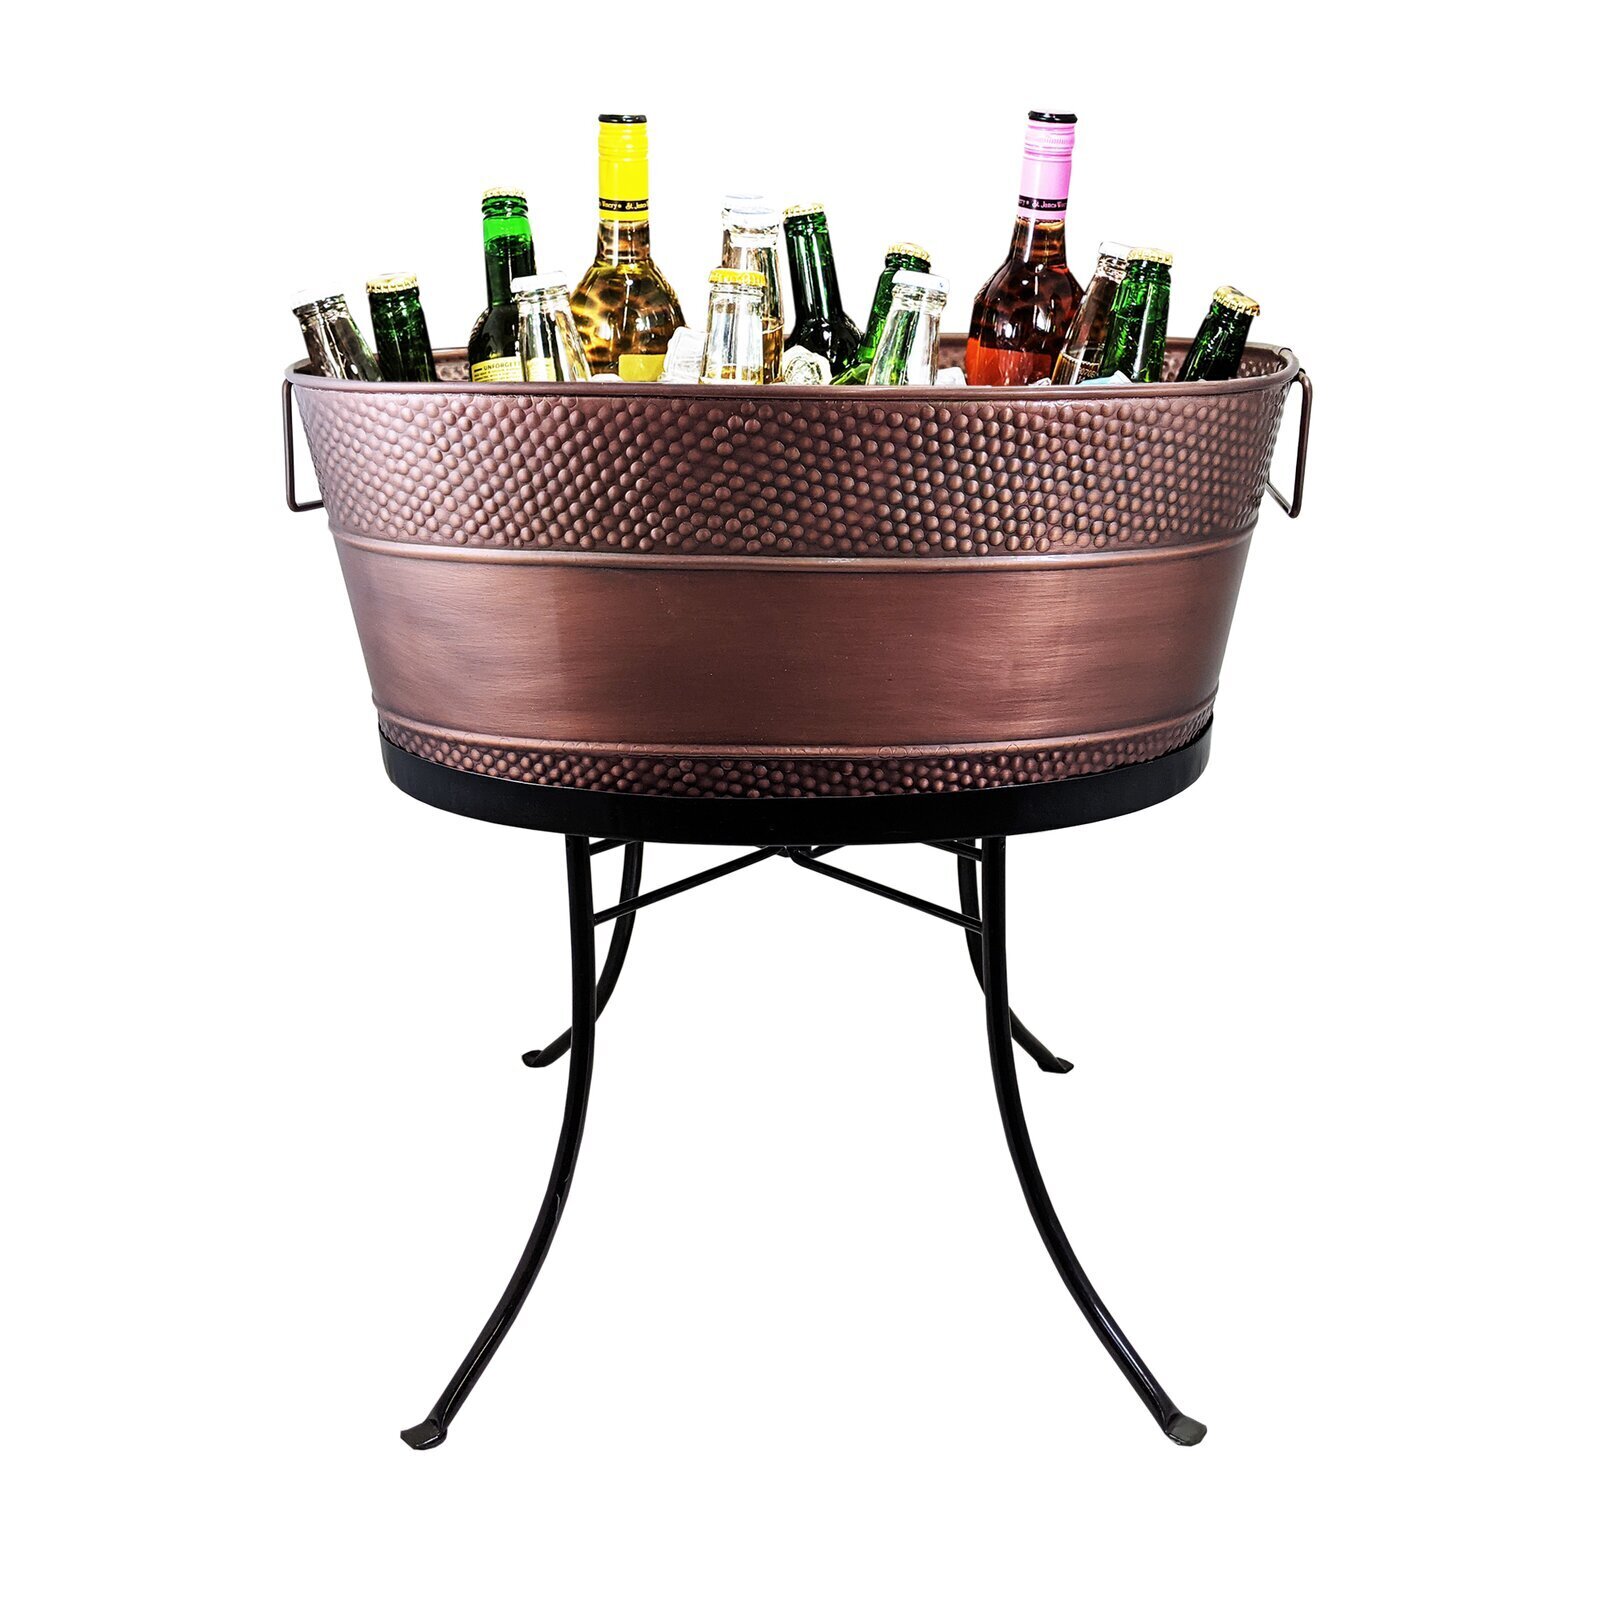 Beverage Tub With Stand - Ideas on Foter